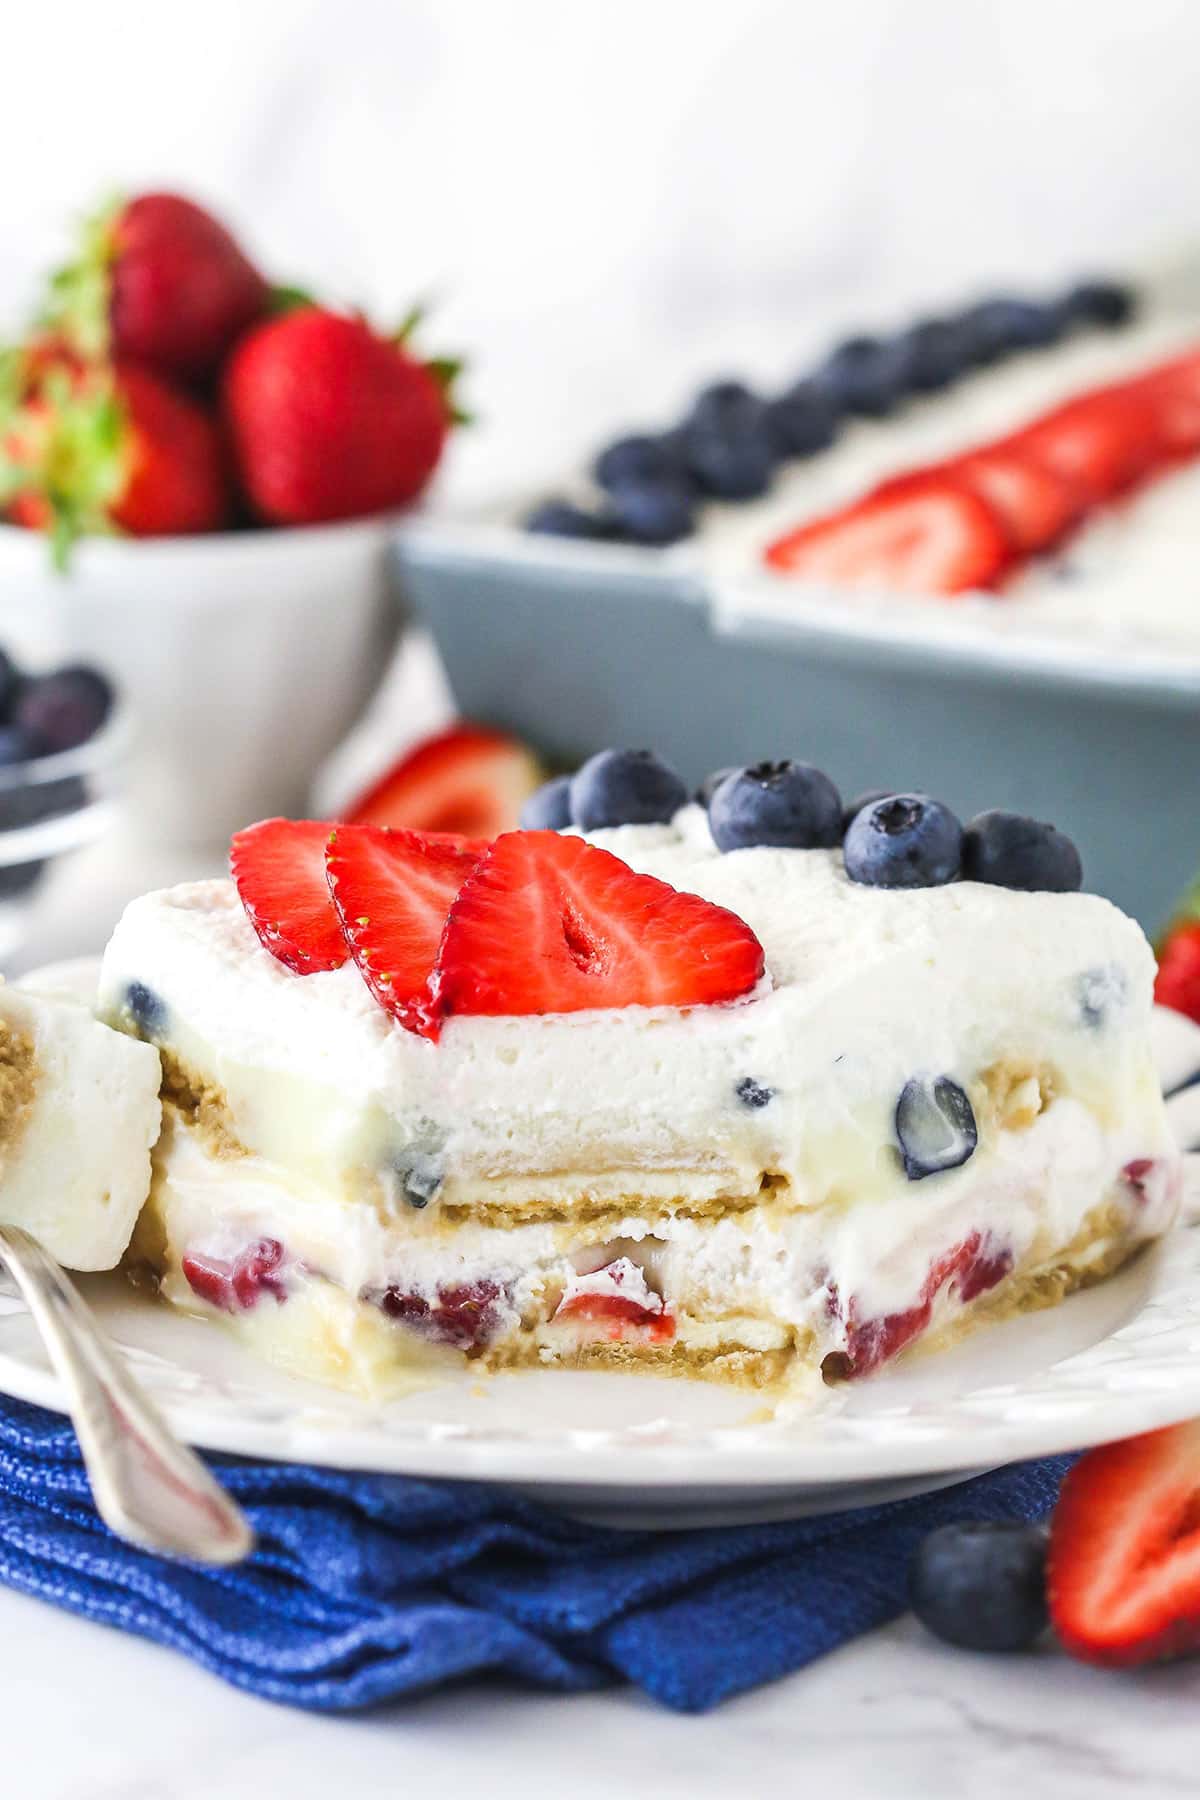 slice of berry icebox cake on white plate with blue napkin underneath with a bit taken out